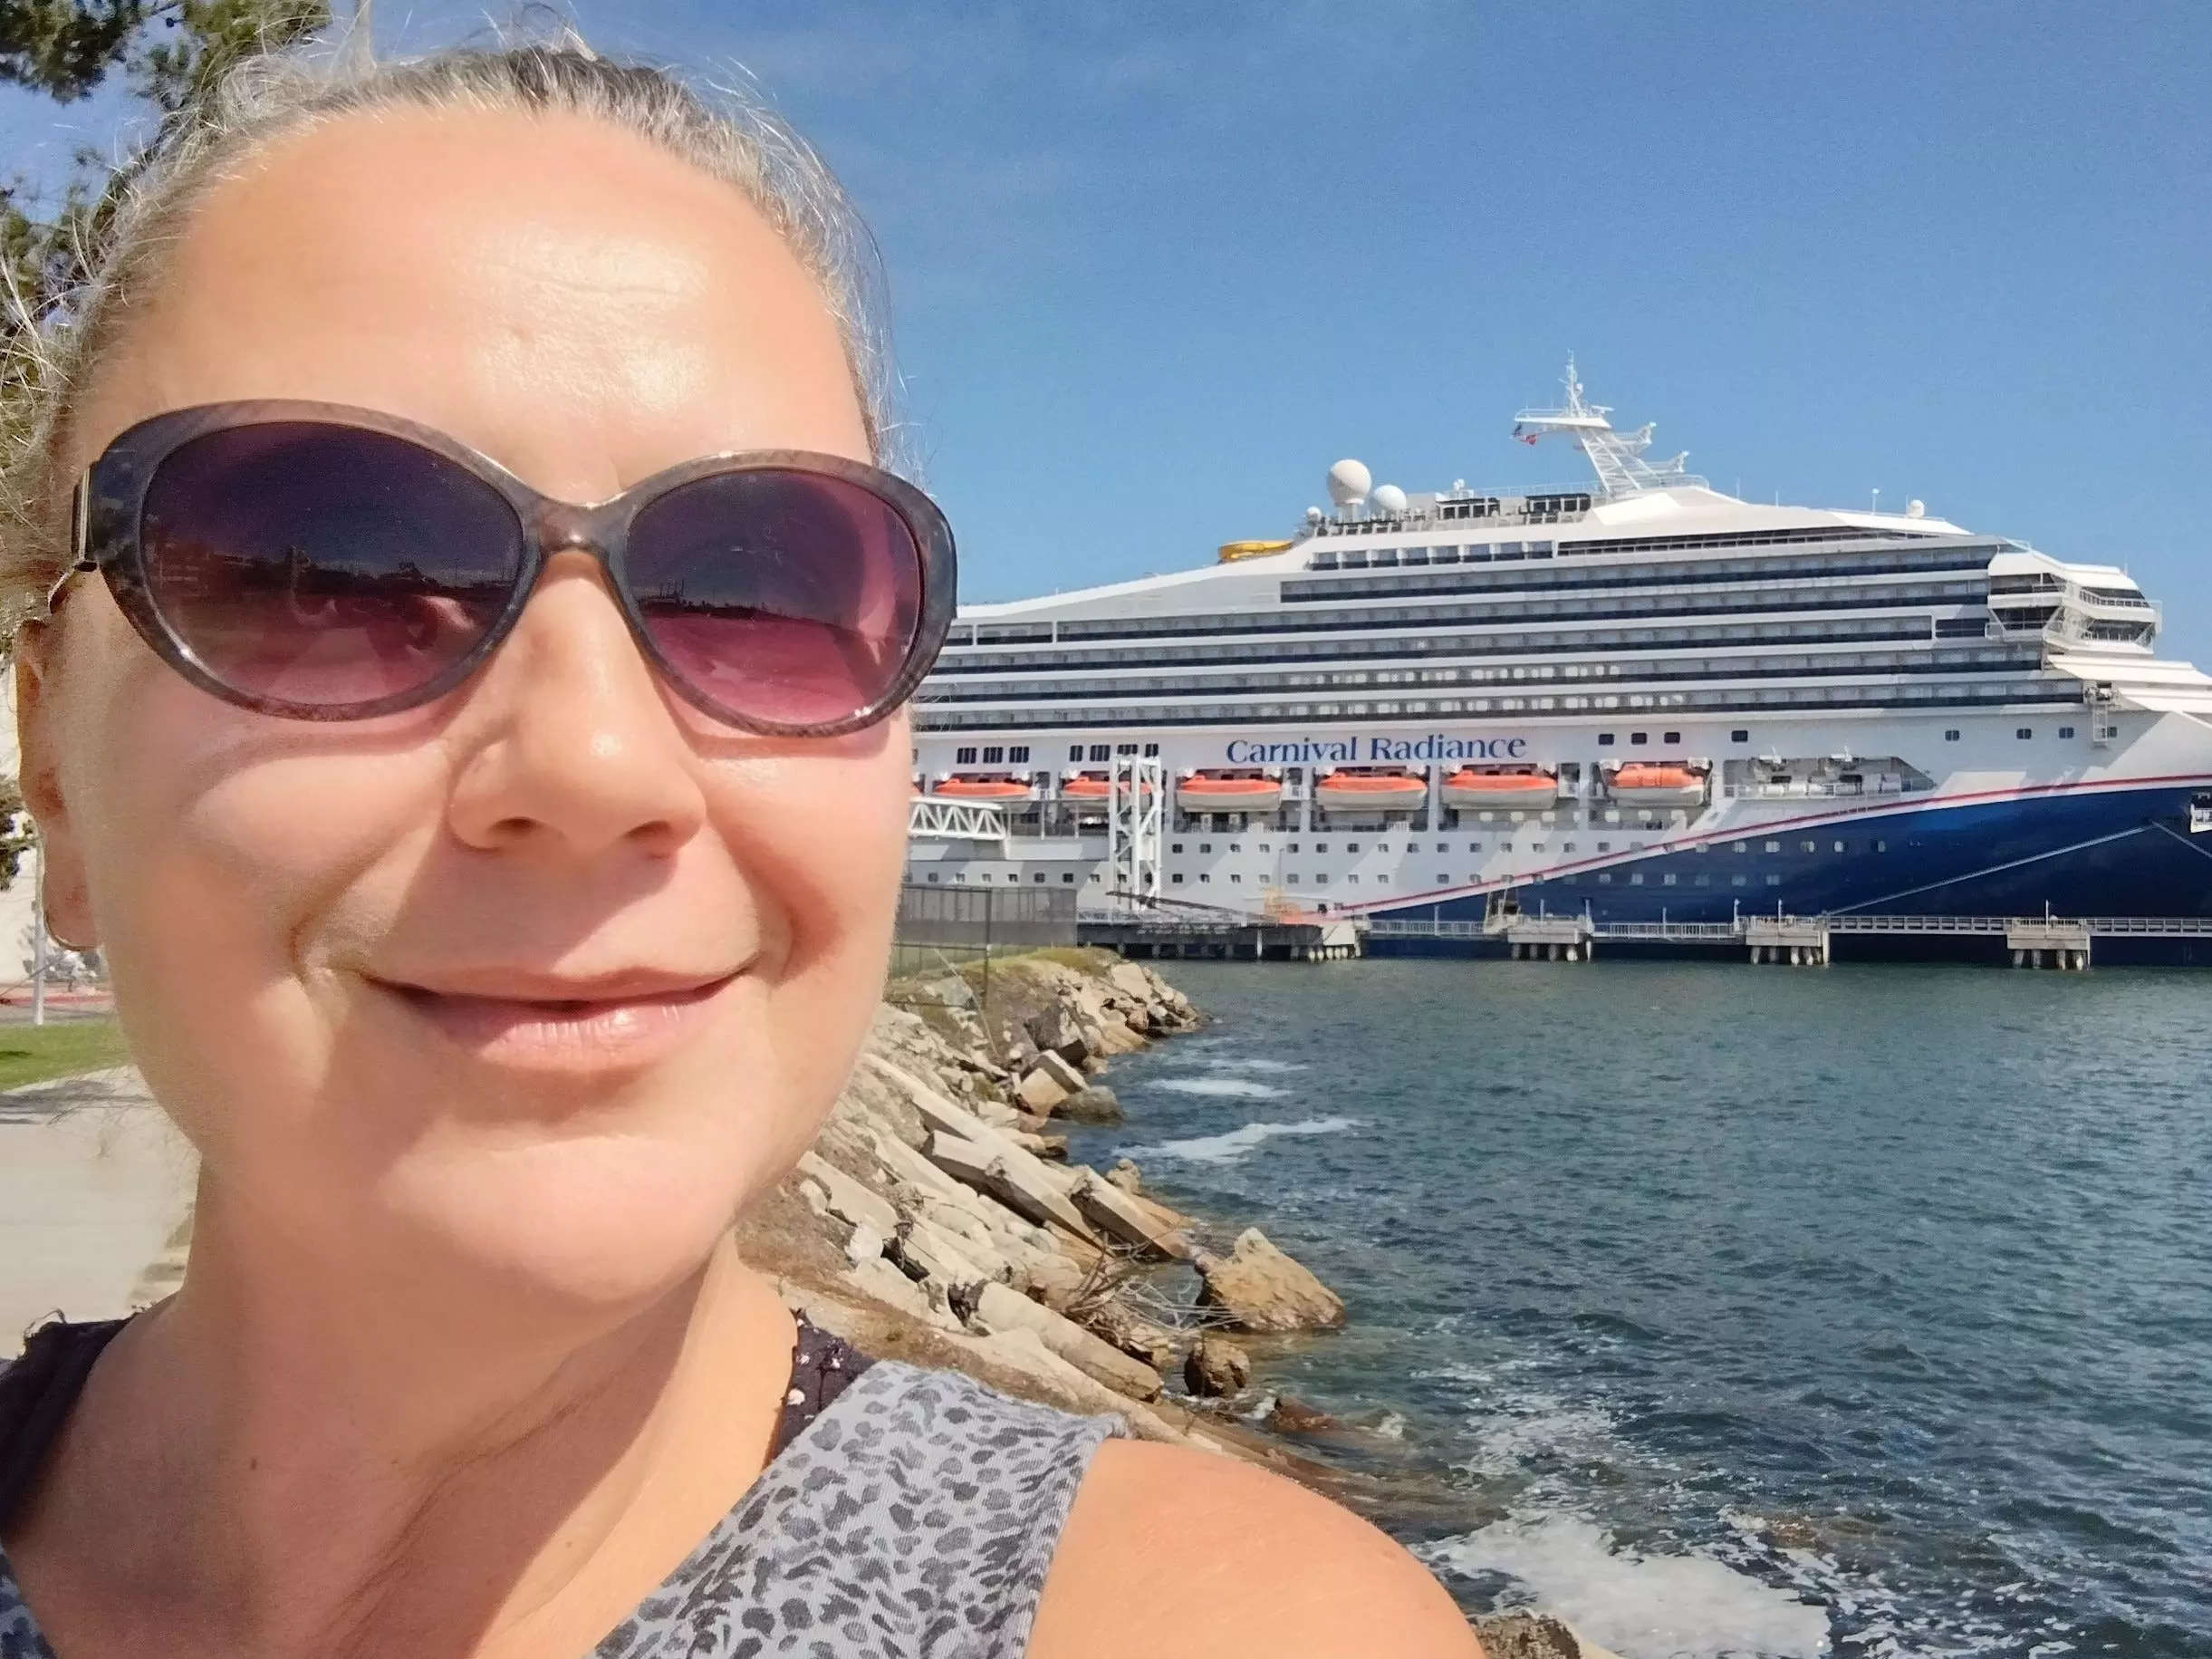 I've sailed on 10 Carnival cruises and think the Radiance is the best